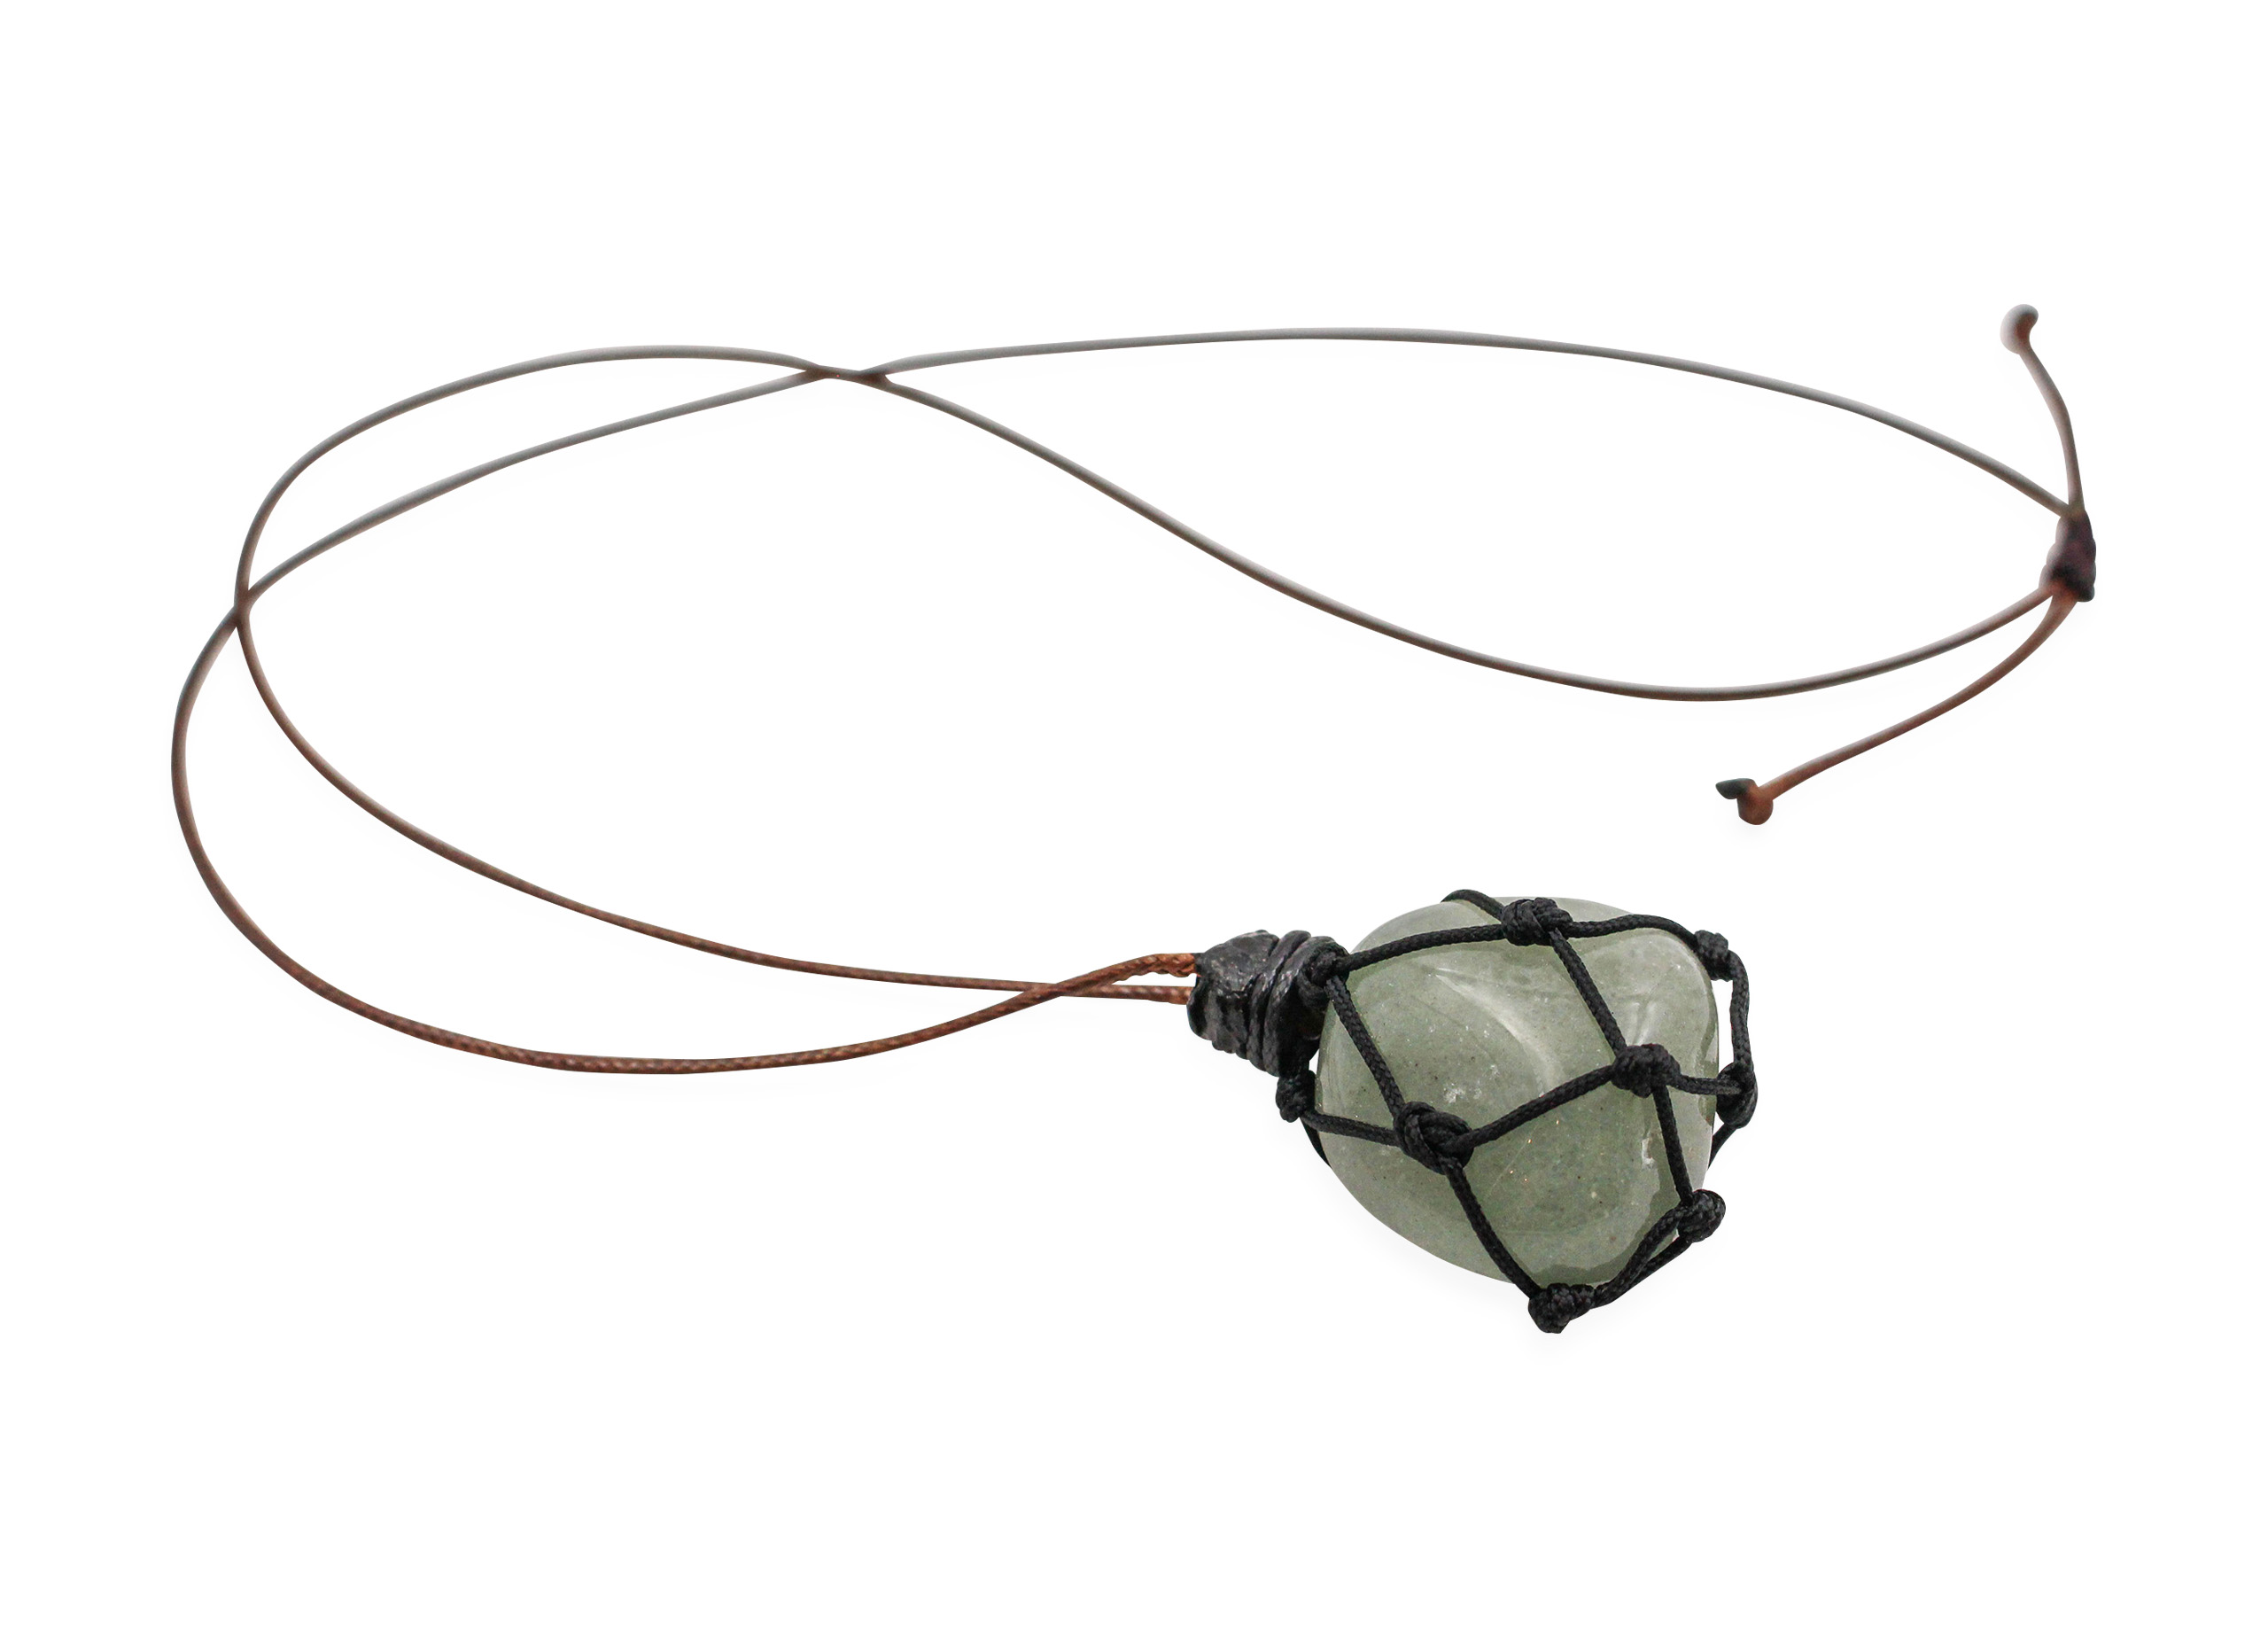 Aventurine - Wrapped Polished Net Necklaces - Crystal Dreams